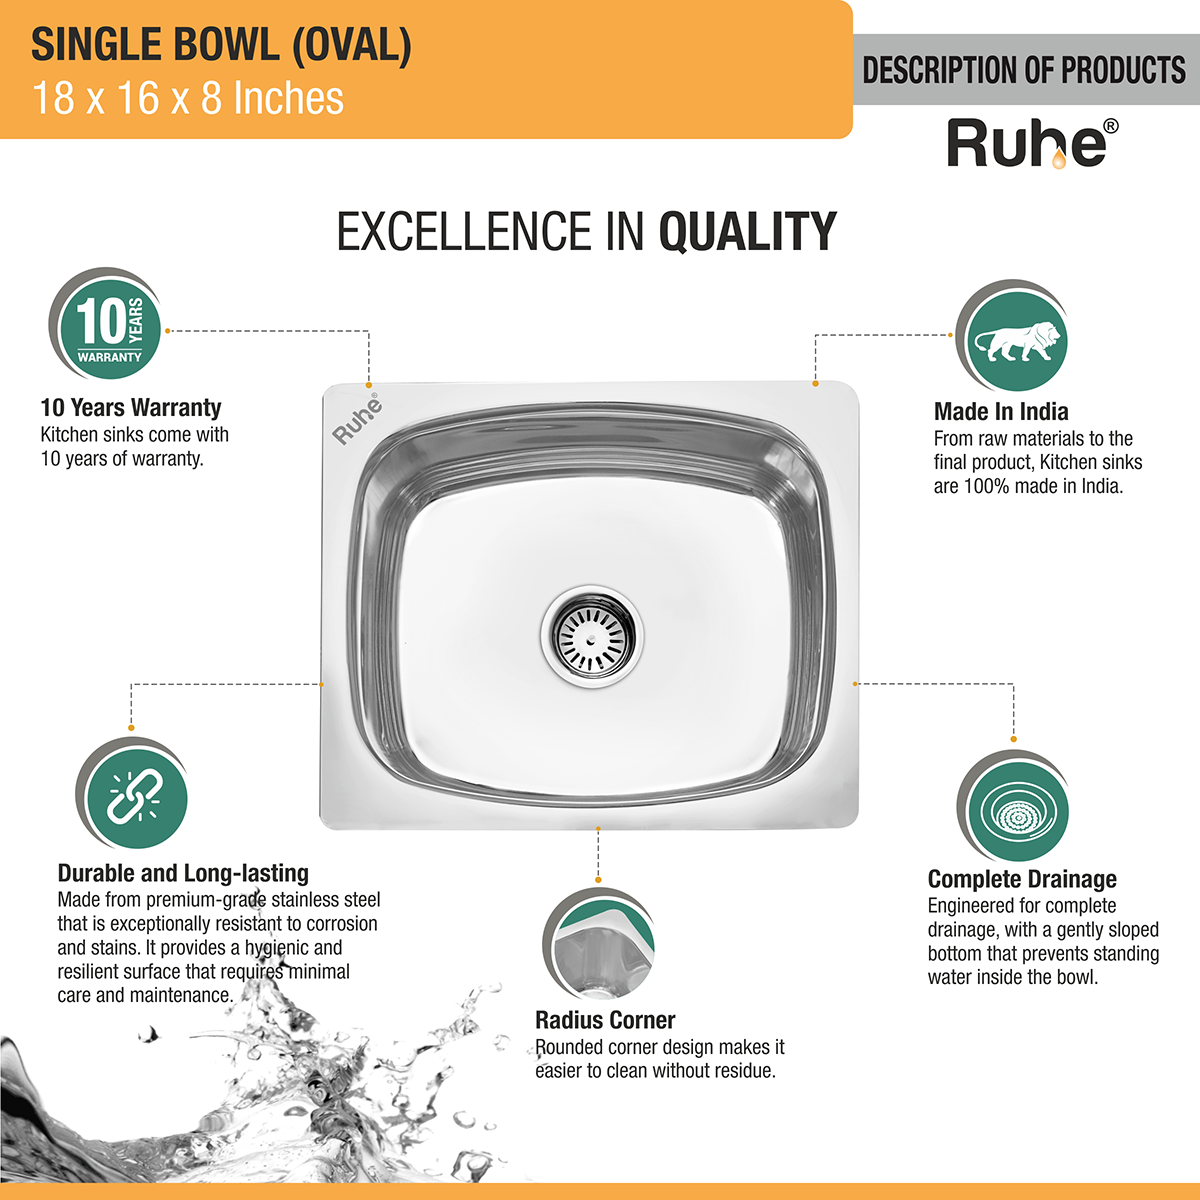 Oval Single Bowl (16 x 18 x 8 inches) Kitchen Sink description of products